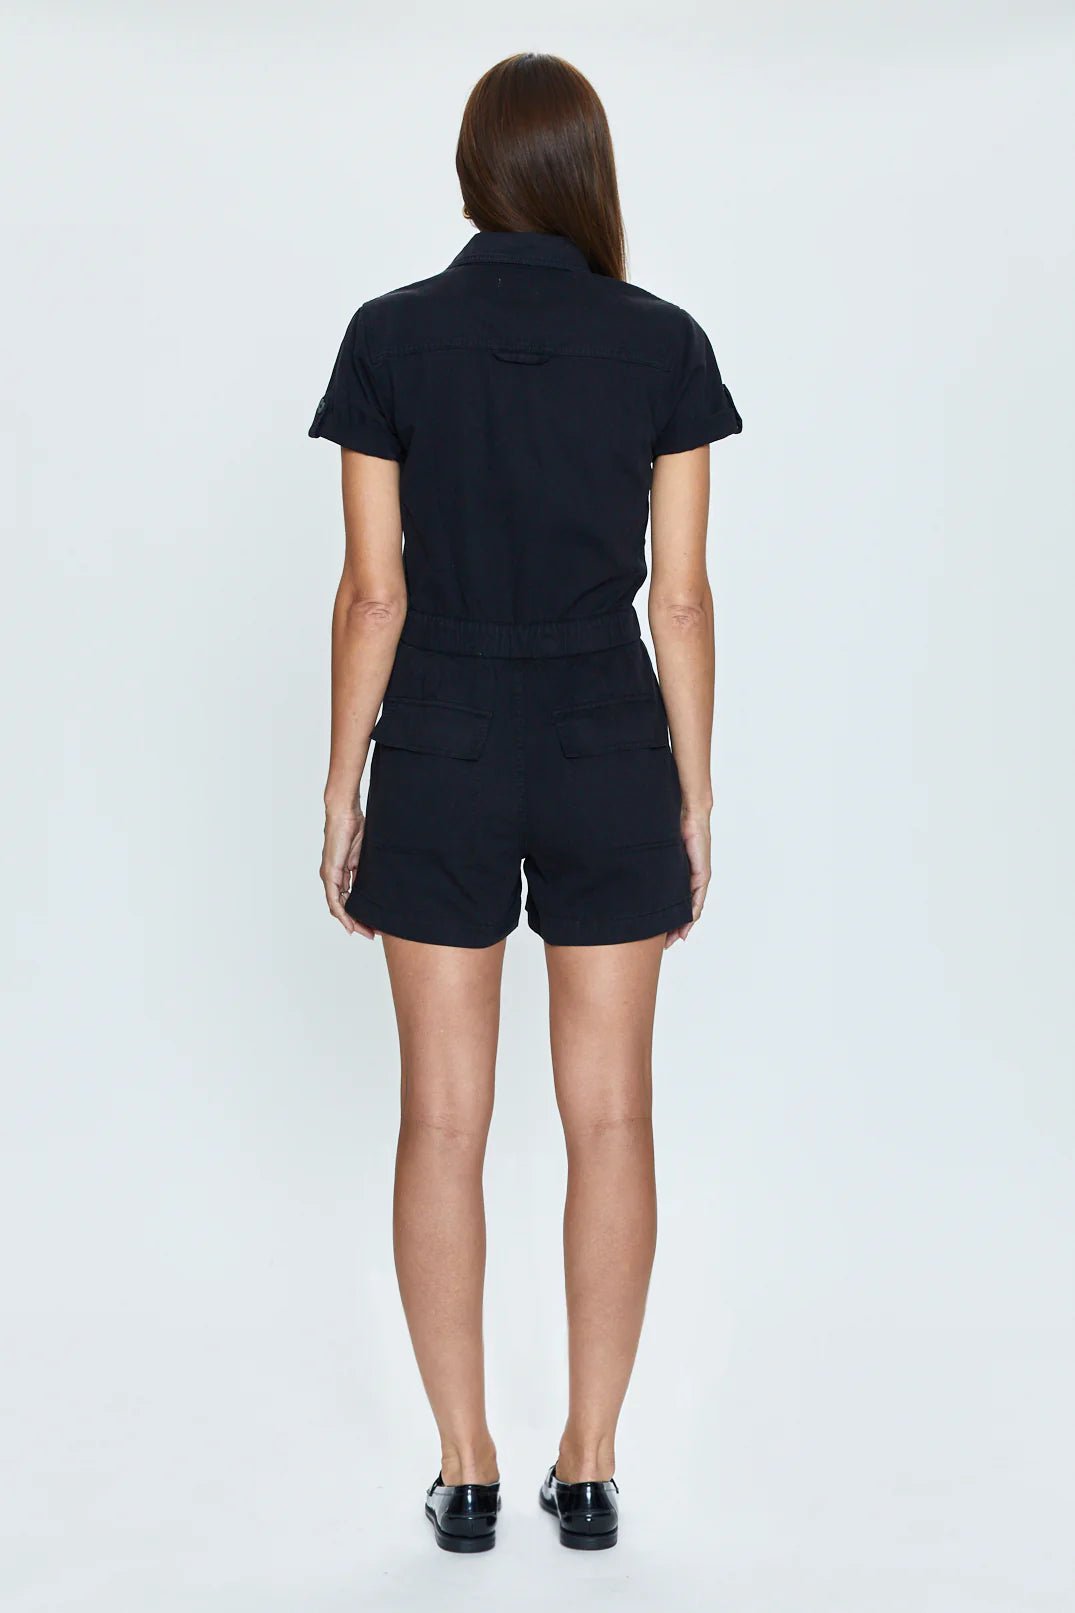 Campbell Aviator Romper - Styled With Claire Pistola